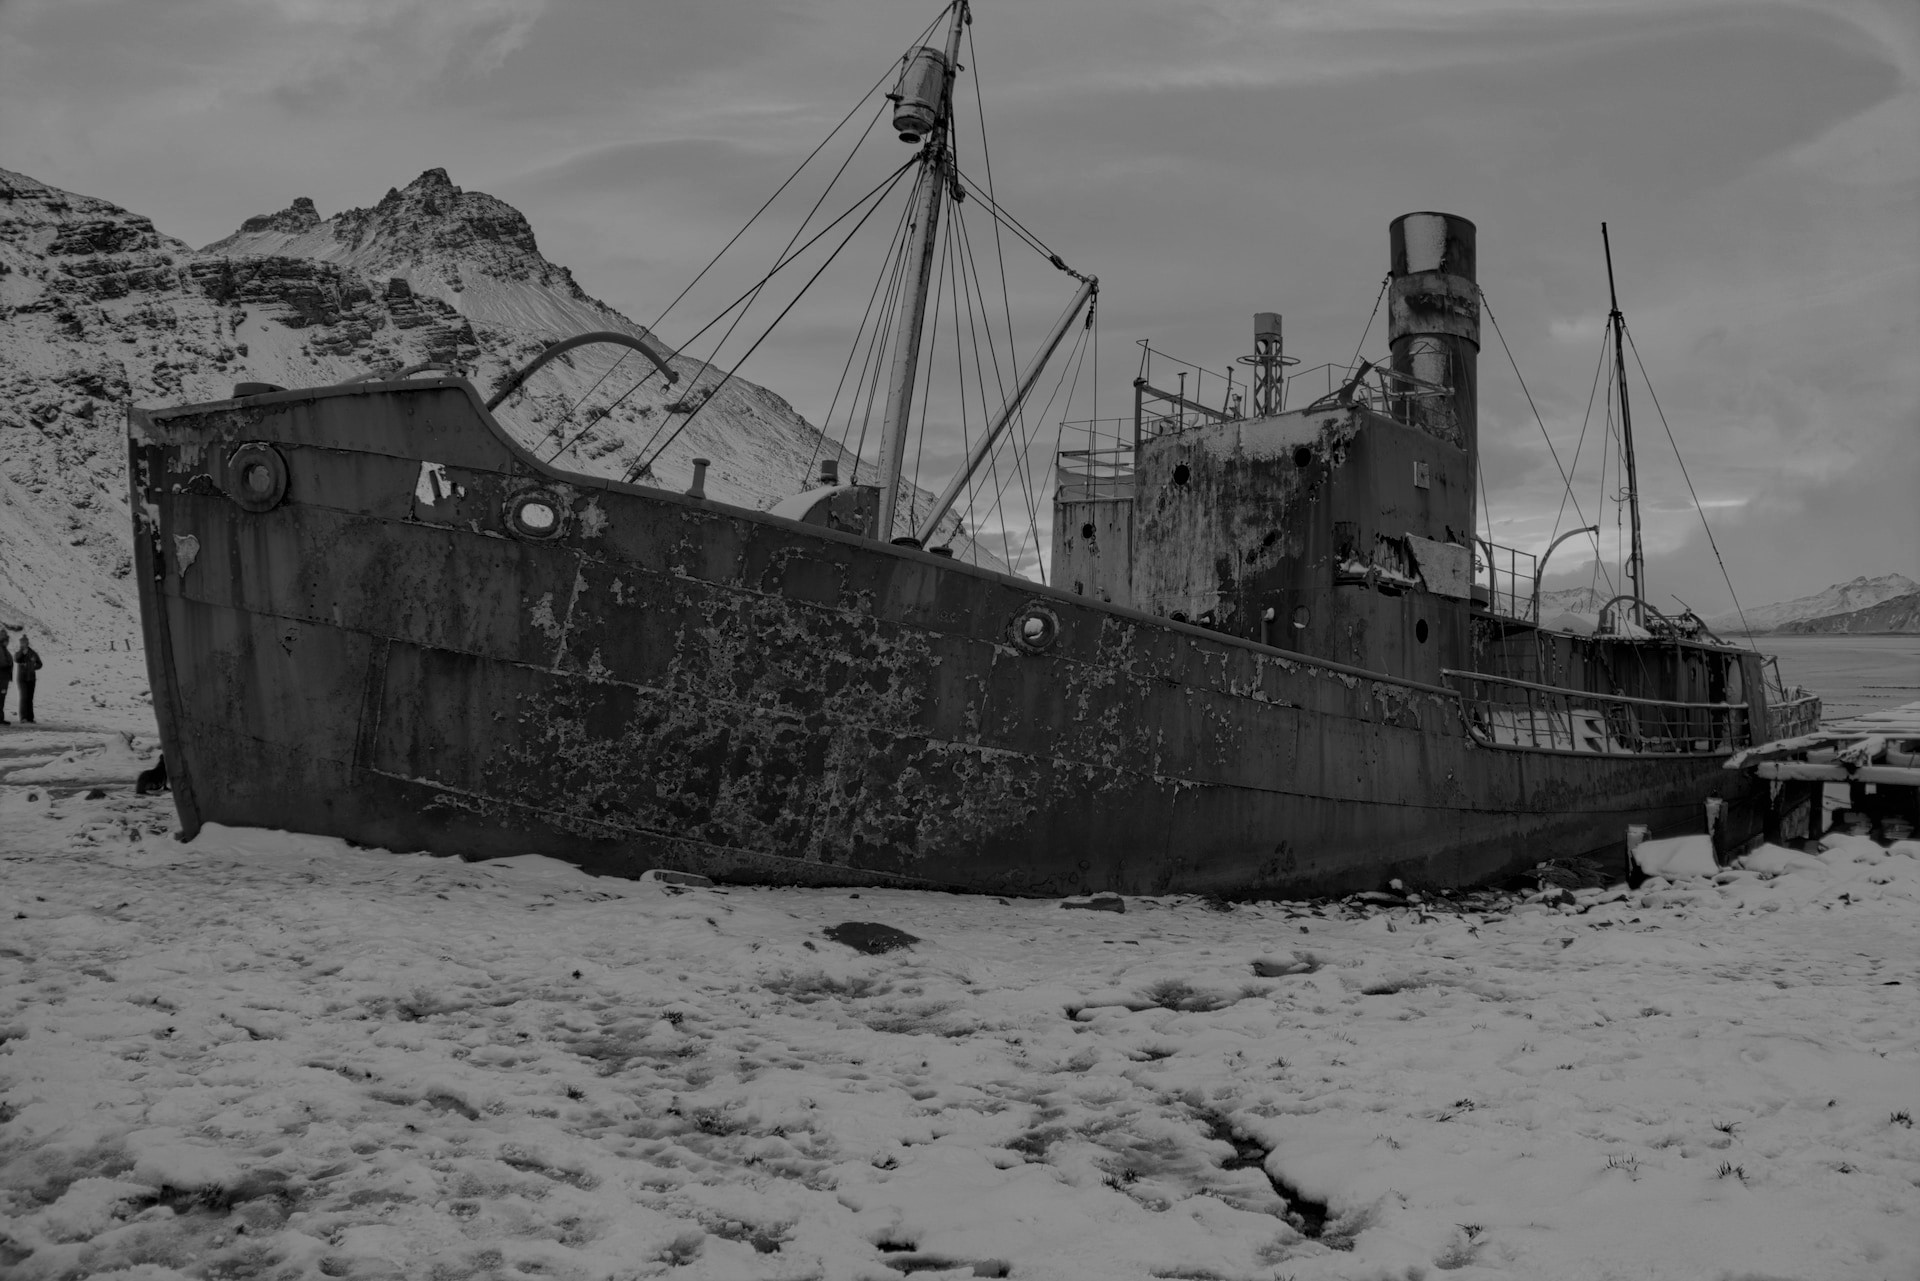 An abandoned ship at Grytviken, in the British Overseas Territory of South Georgia